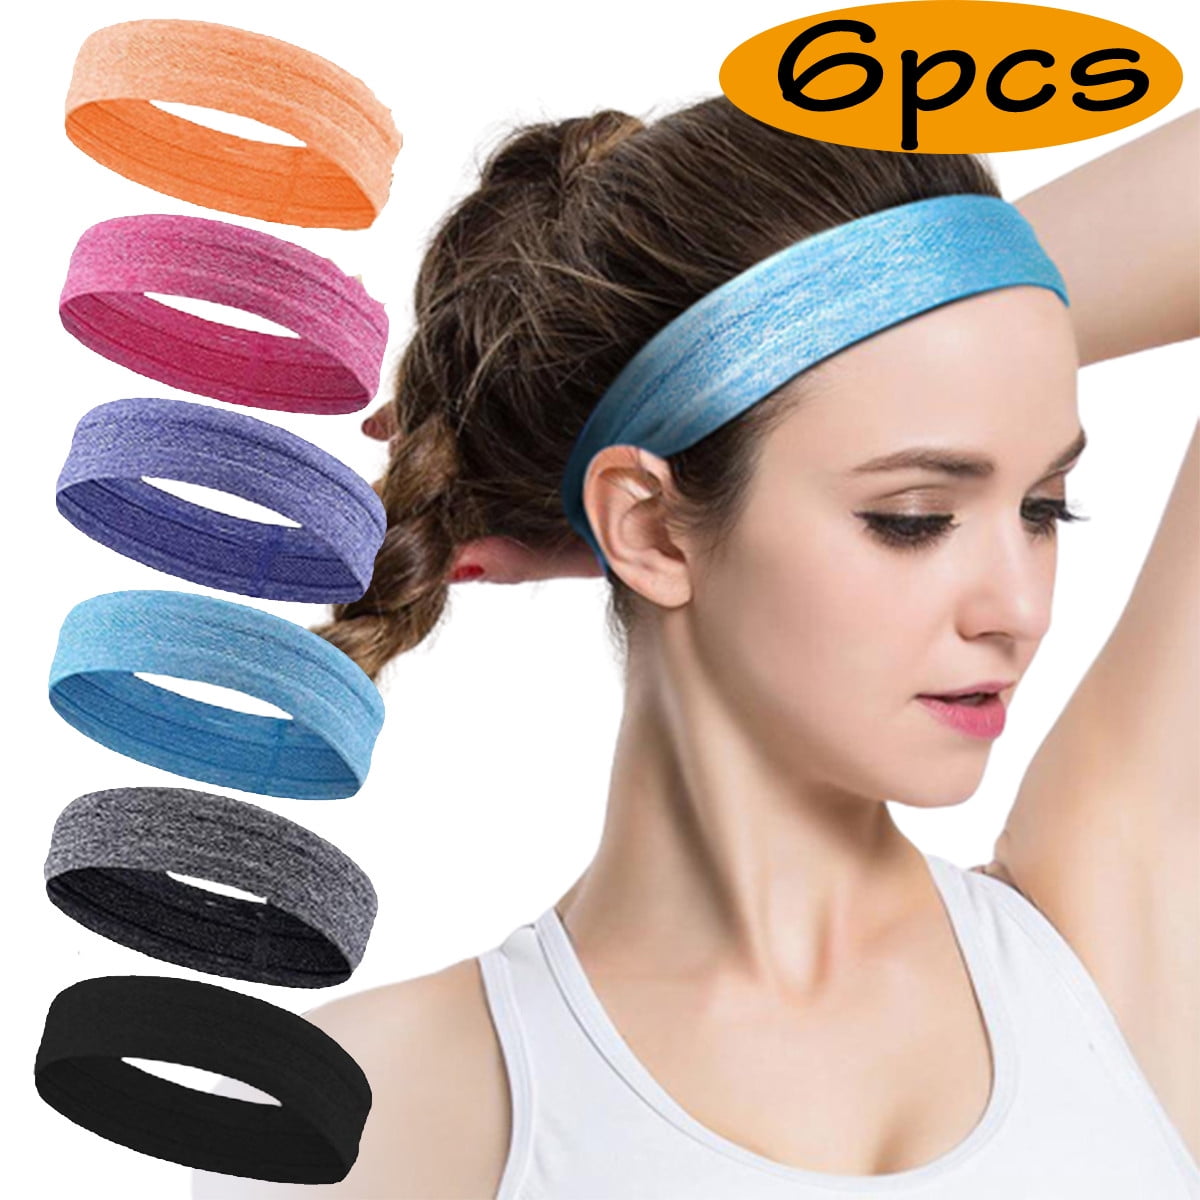 Stretchy Absorbent Quick Drying Fabric Non-Slip Grip Silicone Yoga Headband 3 Assorted Color Workout Headbands Exercise Band for Running Yoga Exercise Working Travel Headbands for Women & Men 